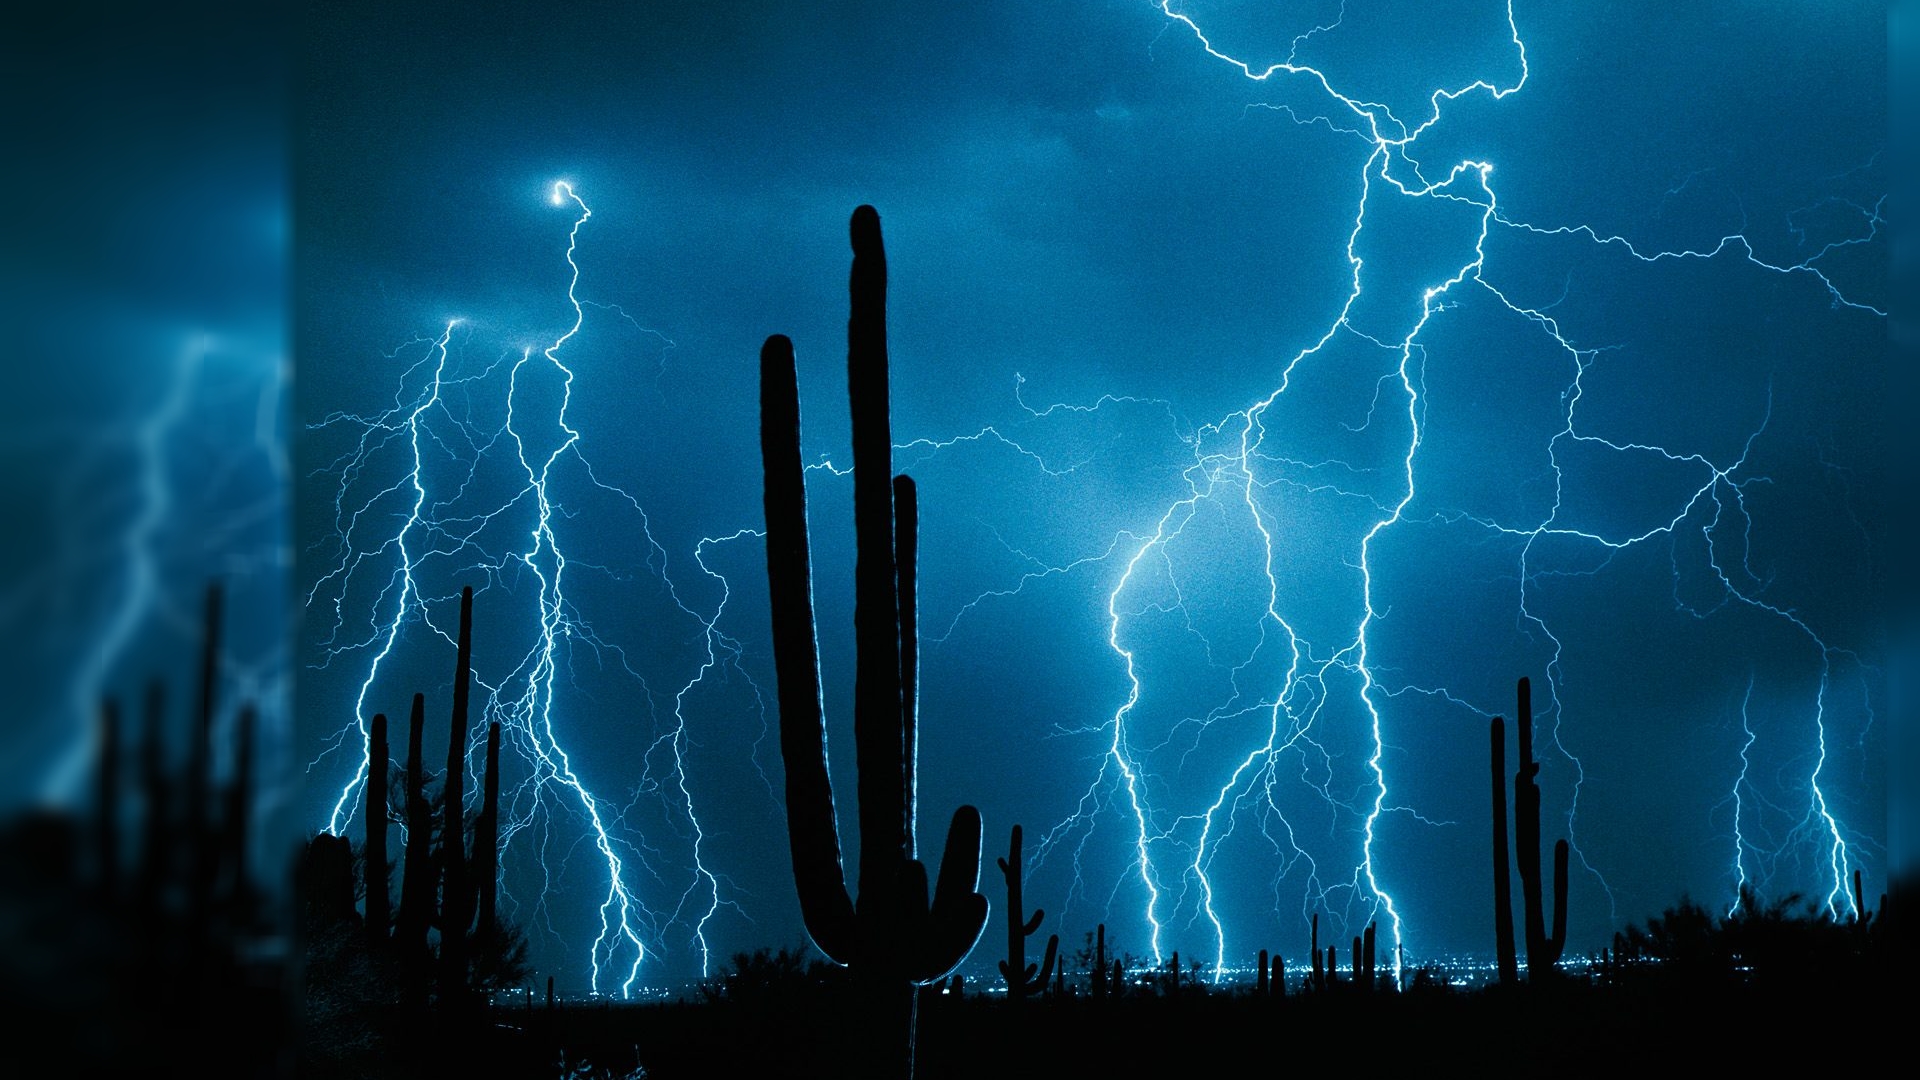 Storms HD Wallpaper For Your Desktop Background Or